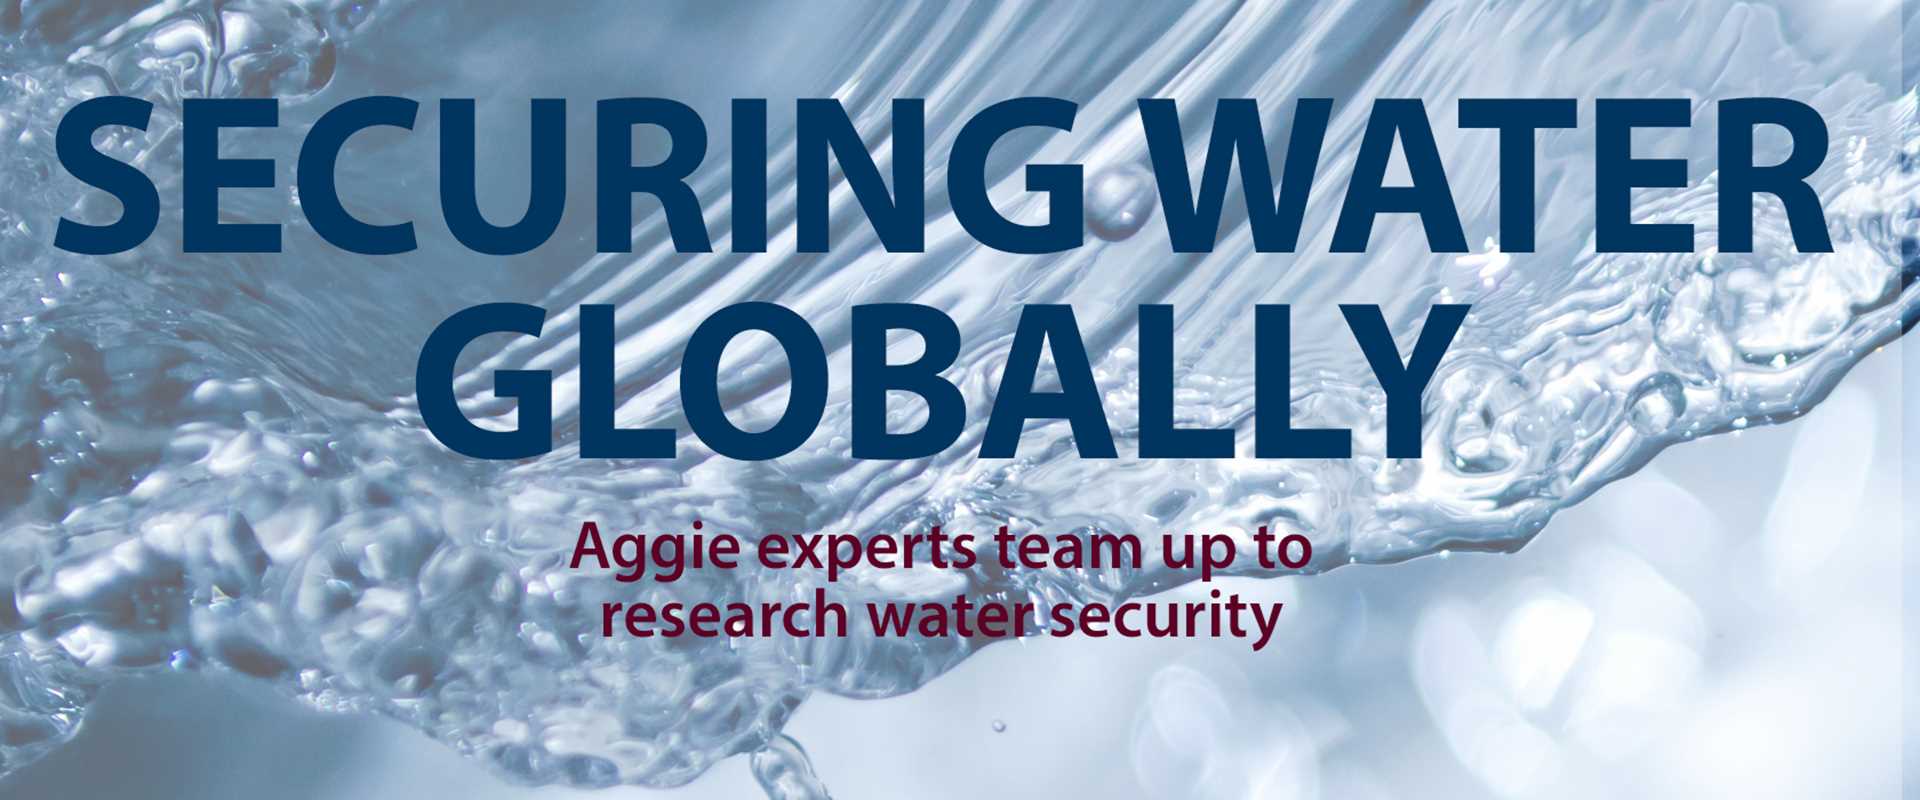 Securing water globally